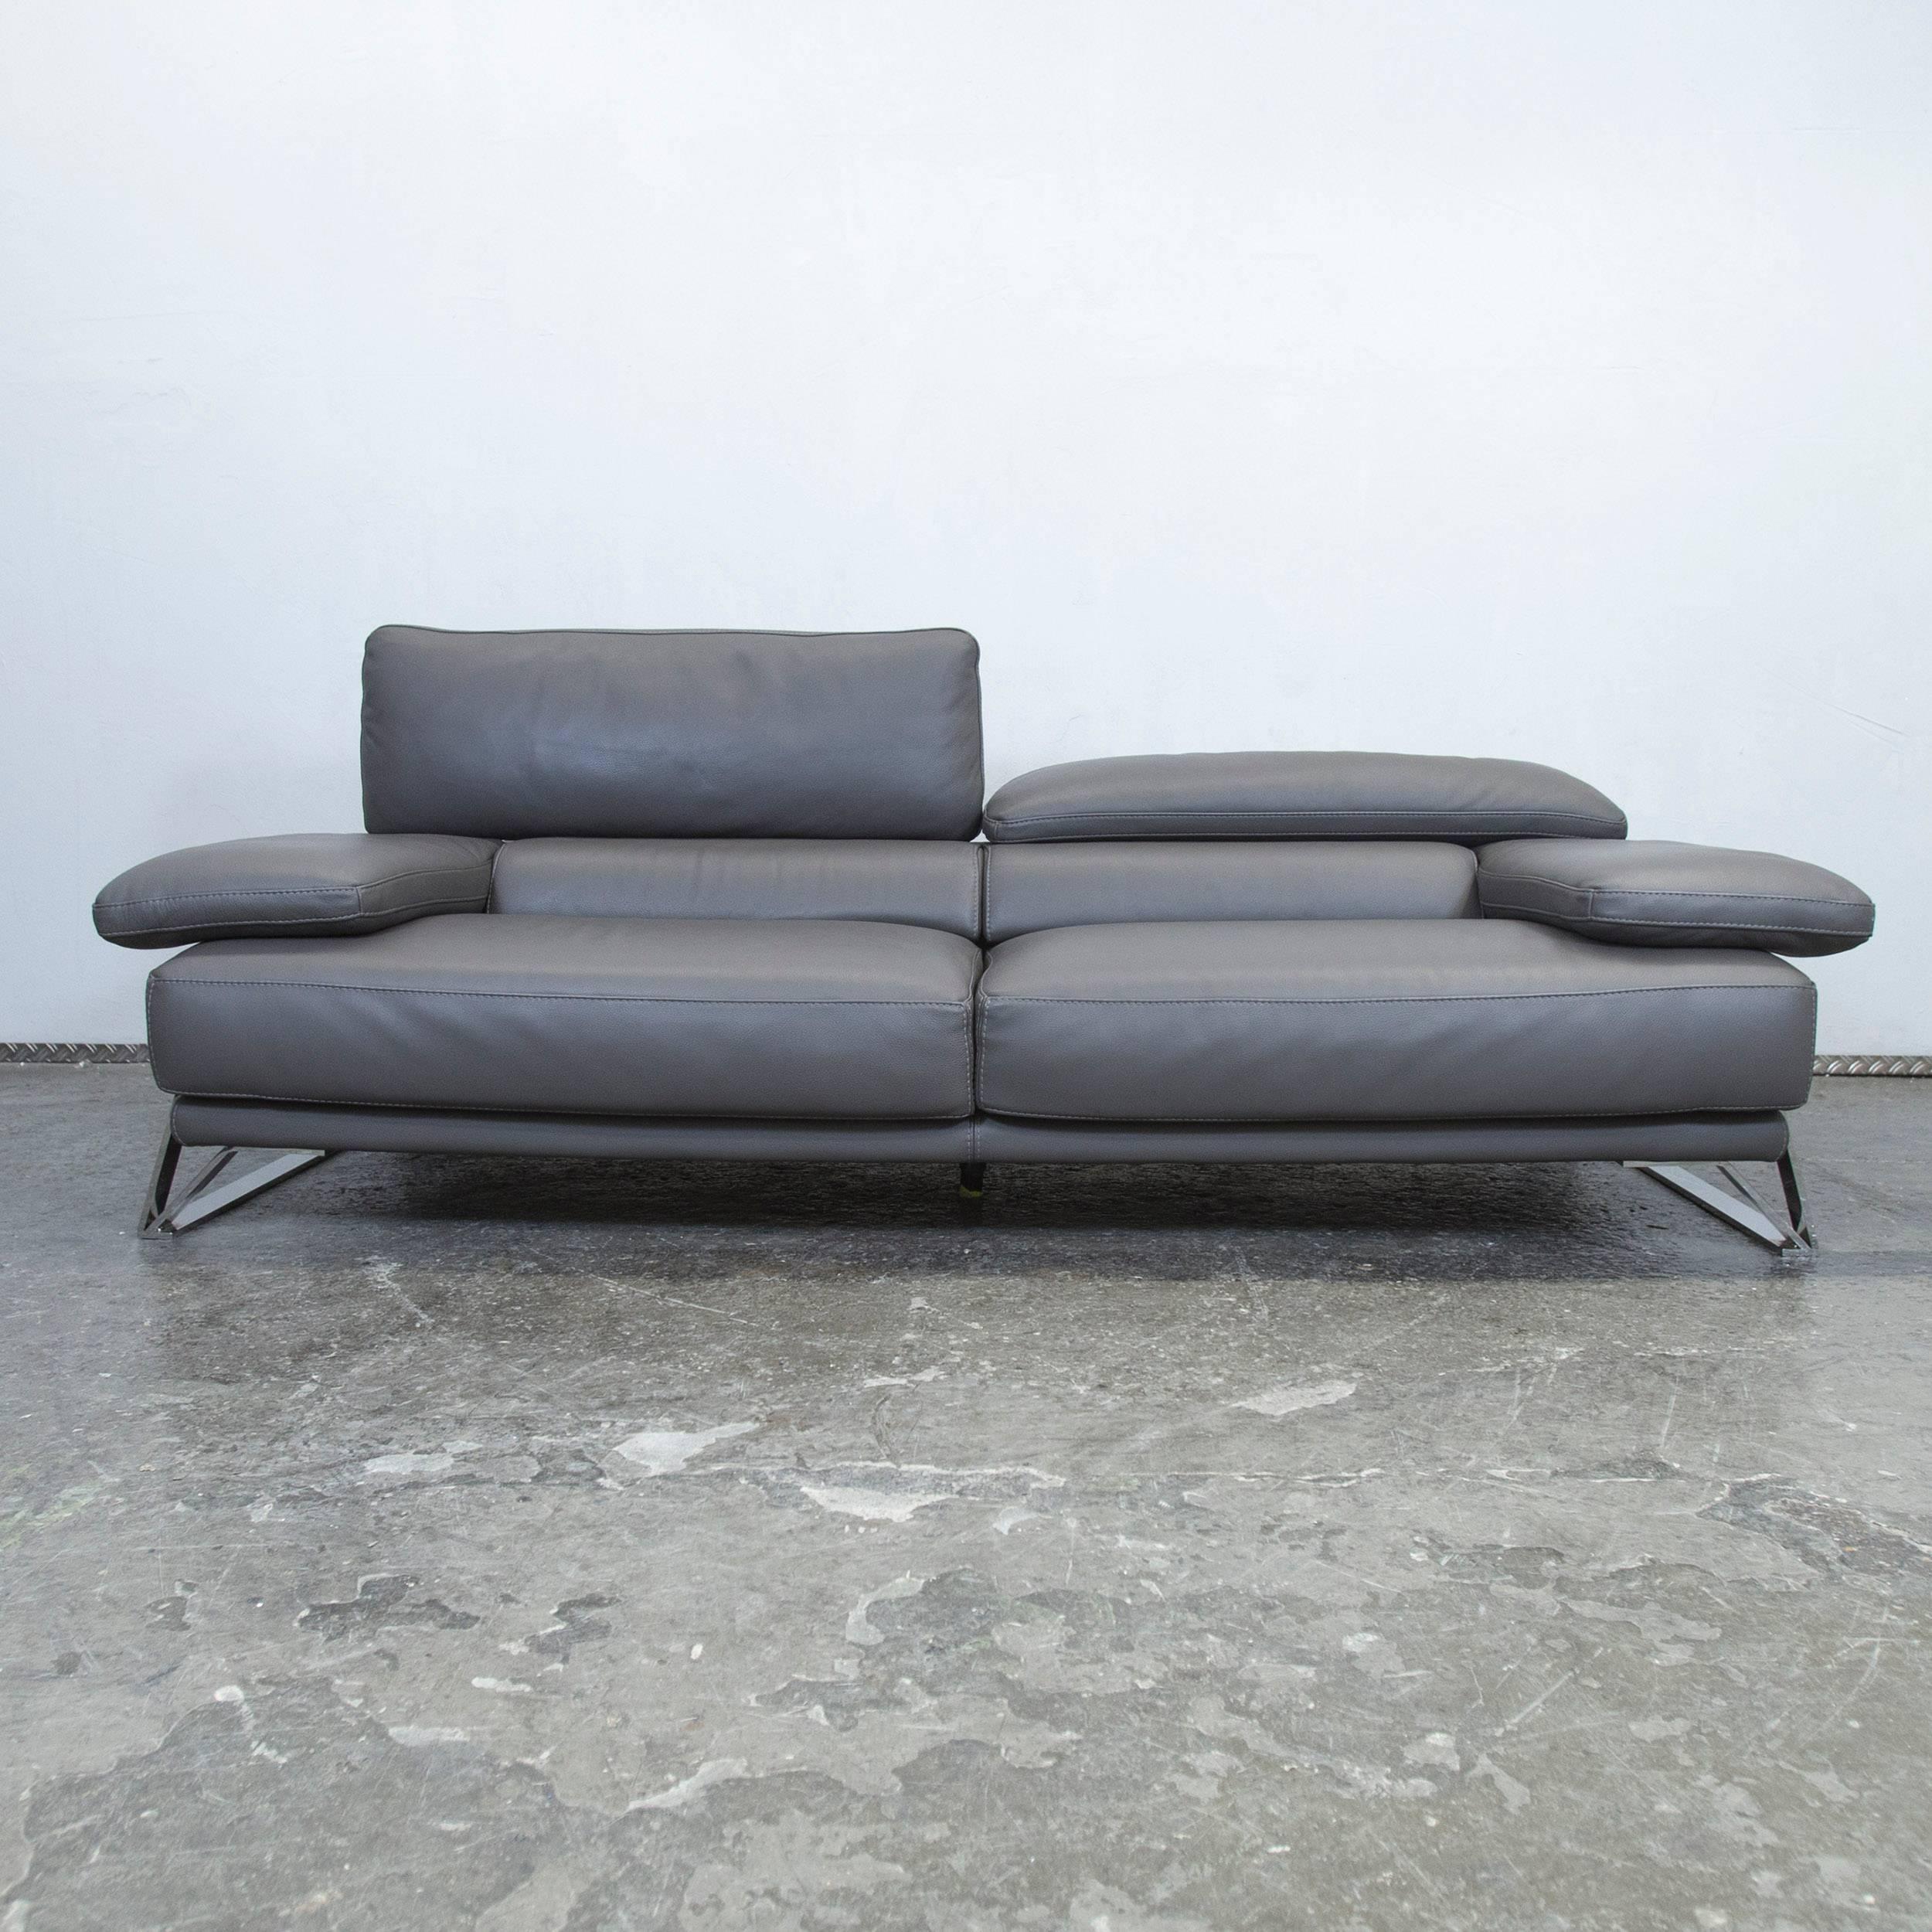 Contemporary Roche Bobois Designer Sofa Grey Leather Three-Seat Couch Function Modern